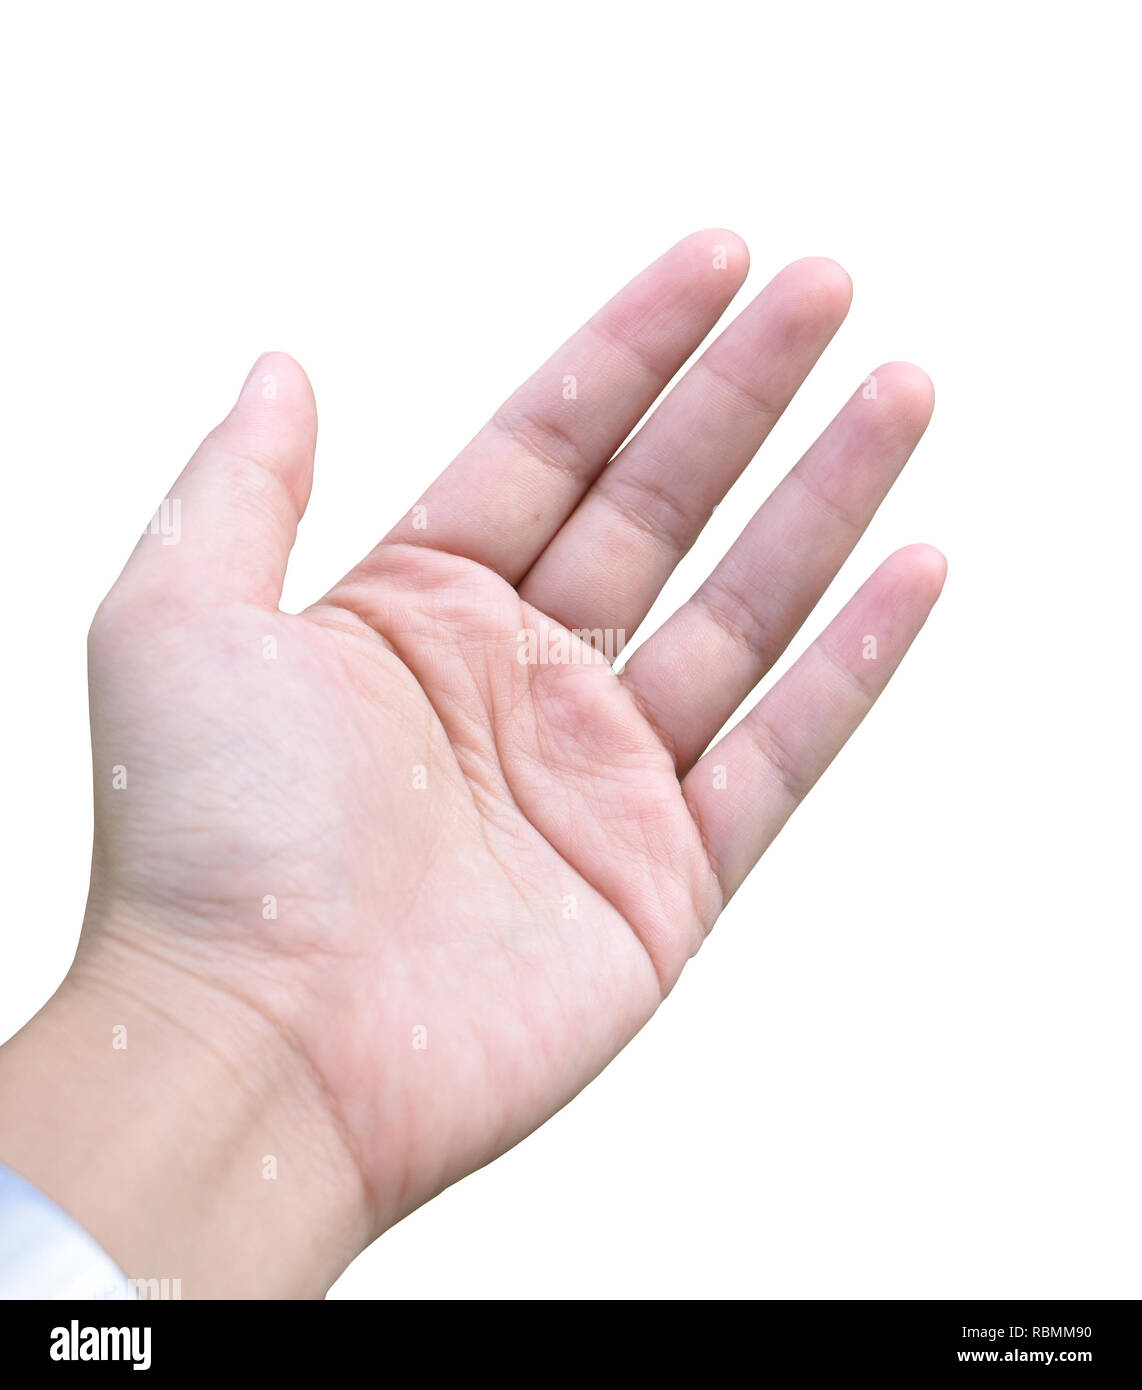 Man open palm of left hand. Stock Photo